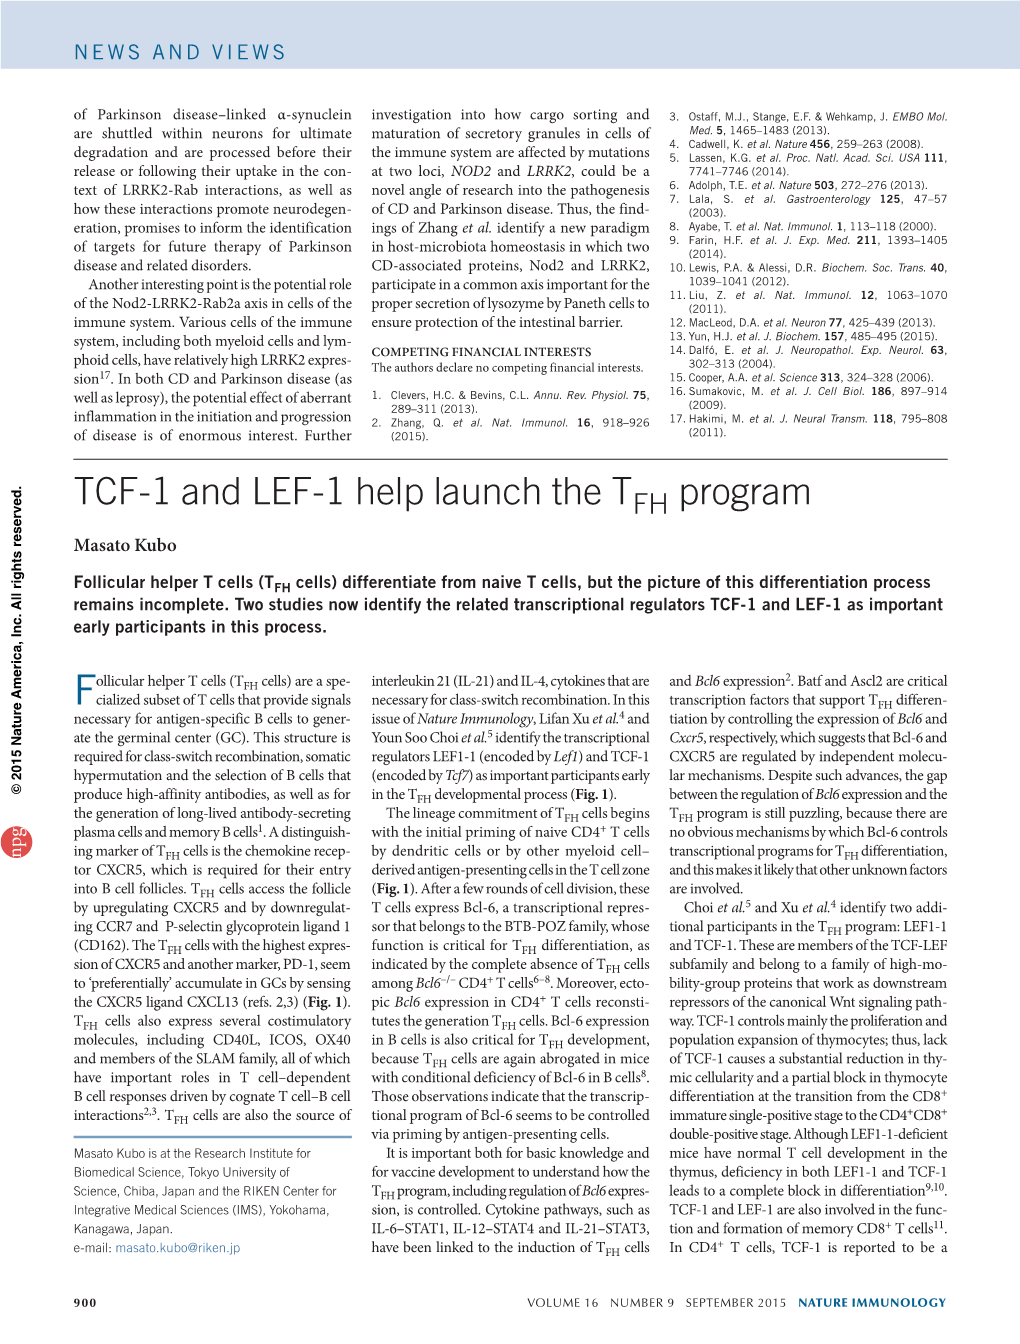 TCF-1 and LEF-1 Help Launch the TFH Program